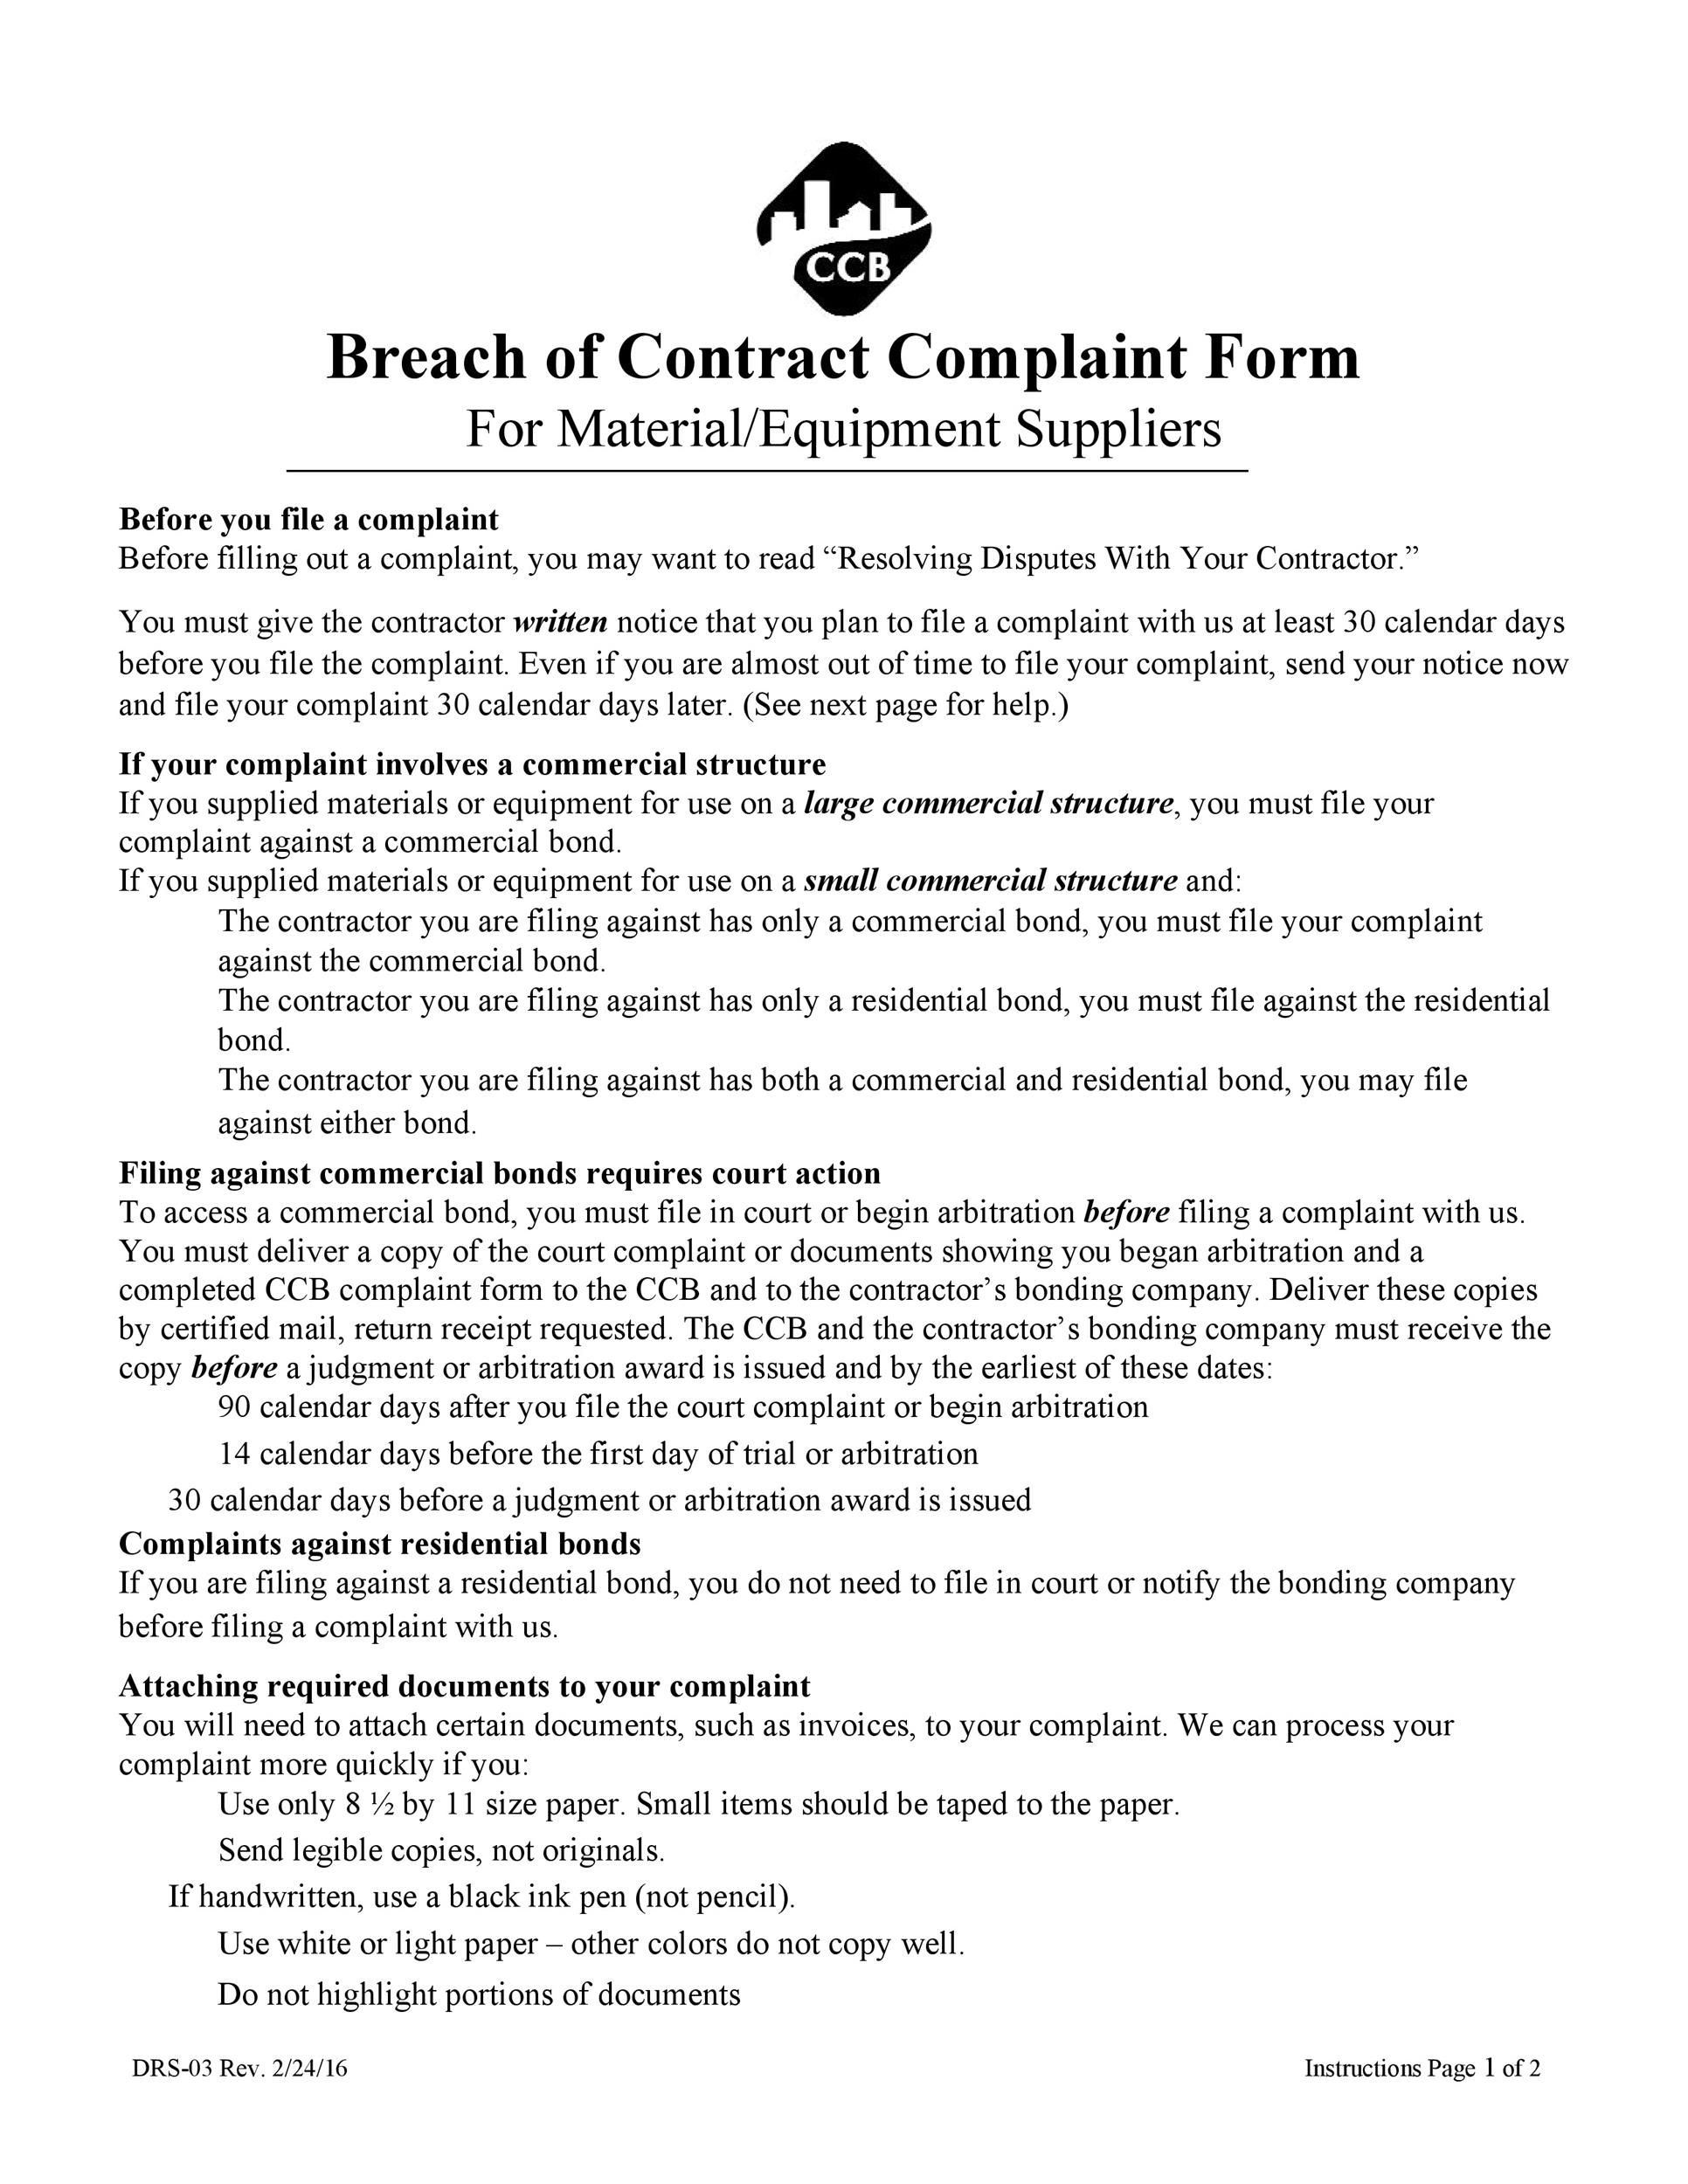 33-professional-breach-of-contracts-templates-examples